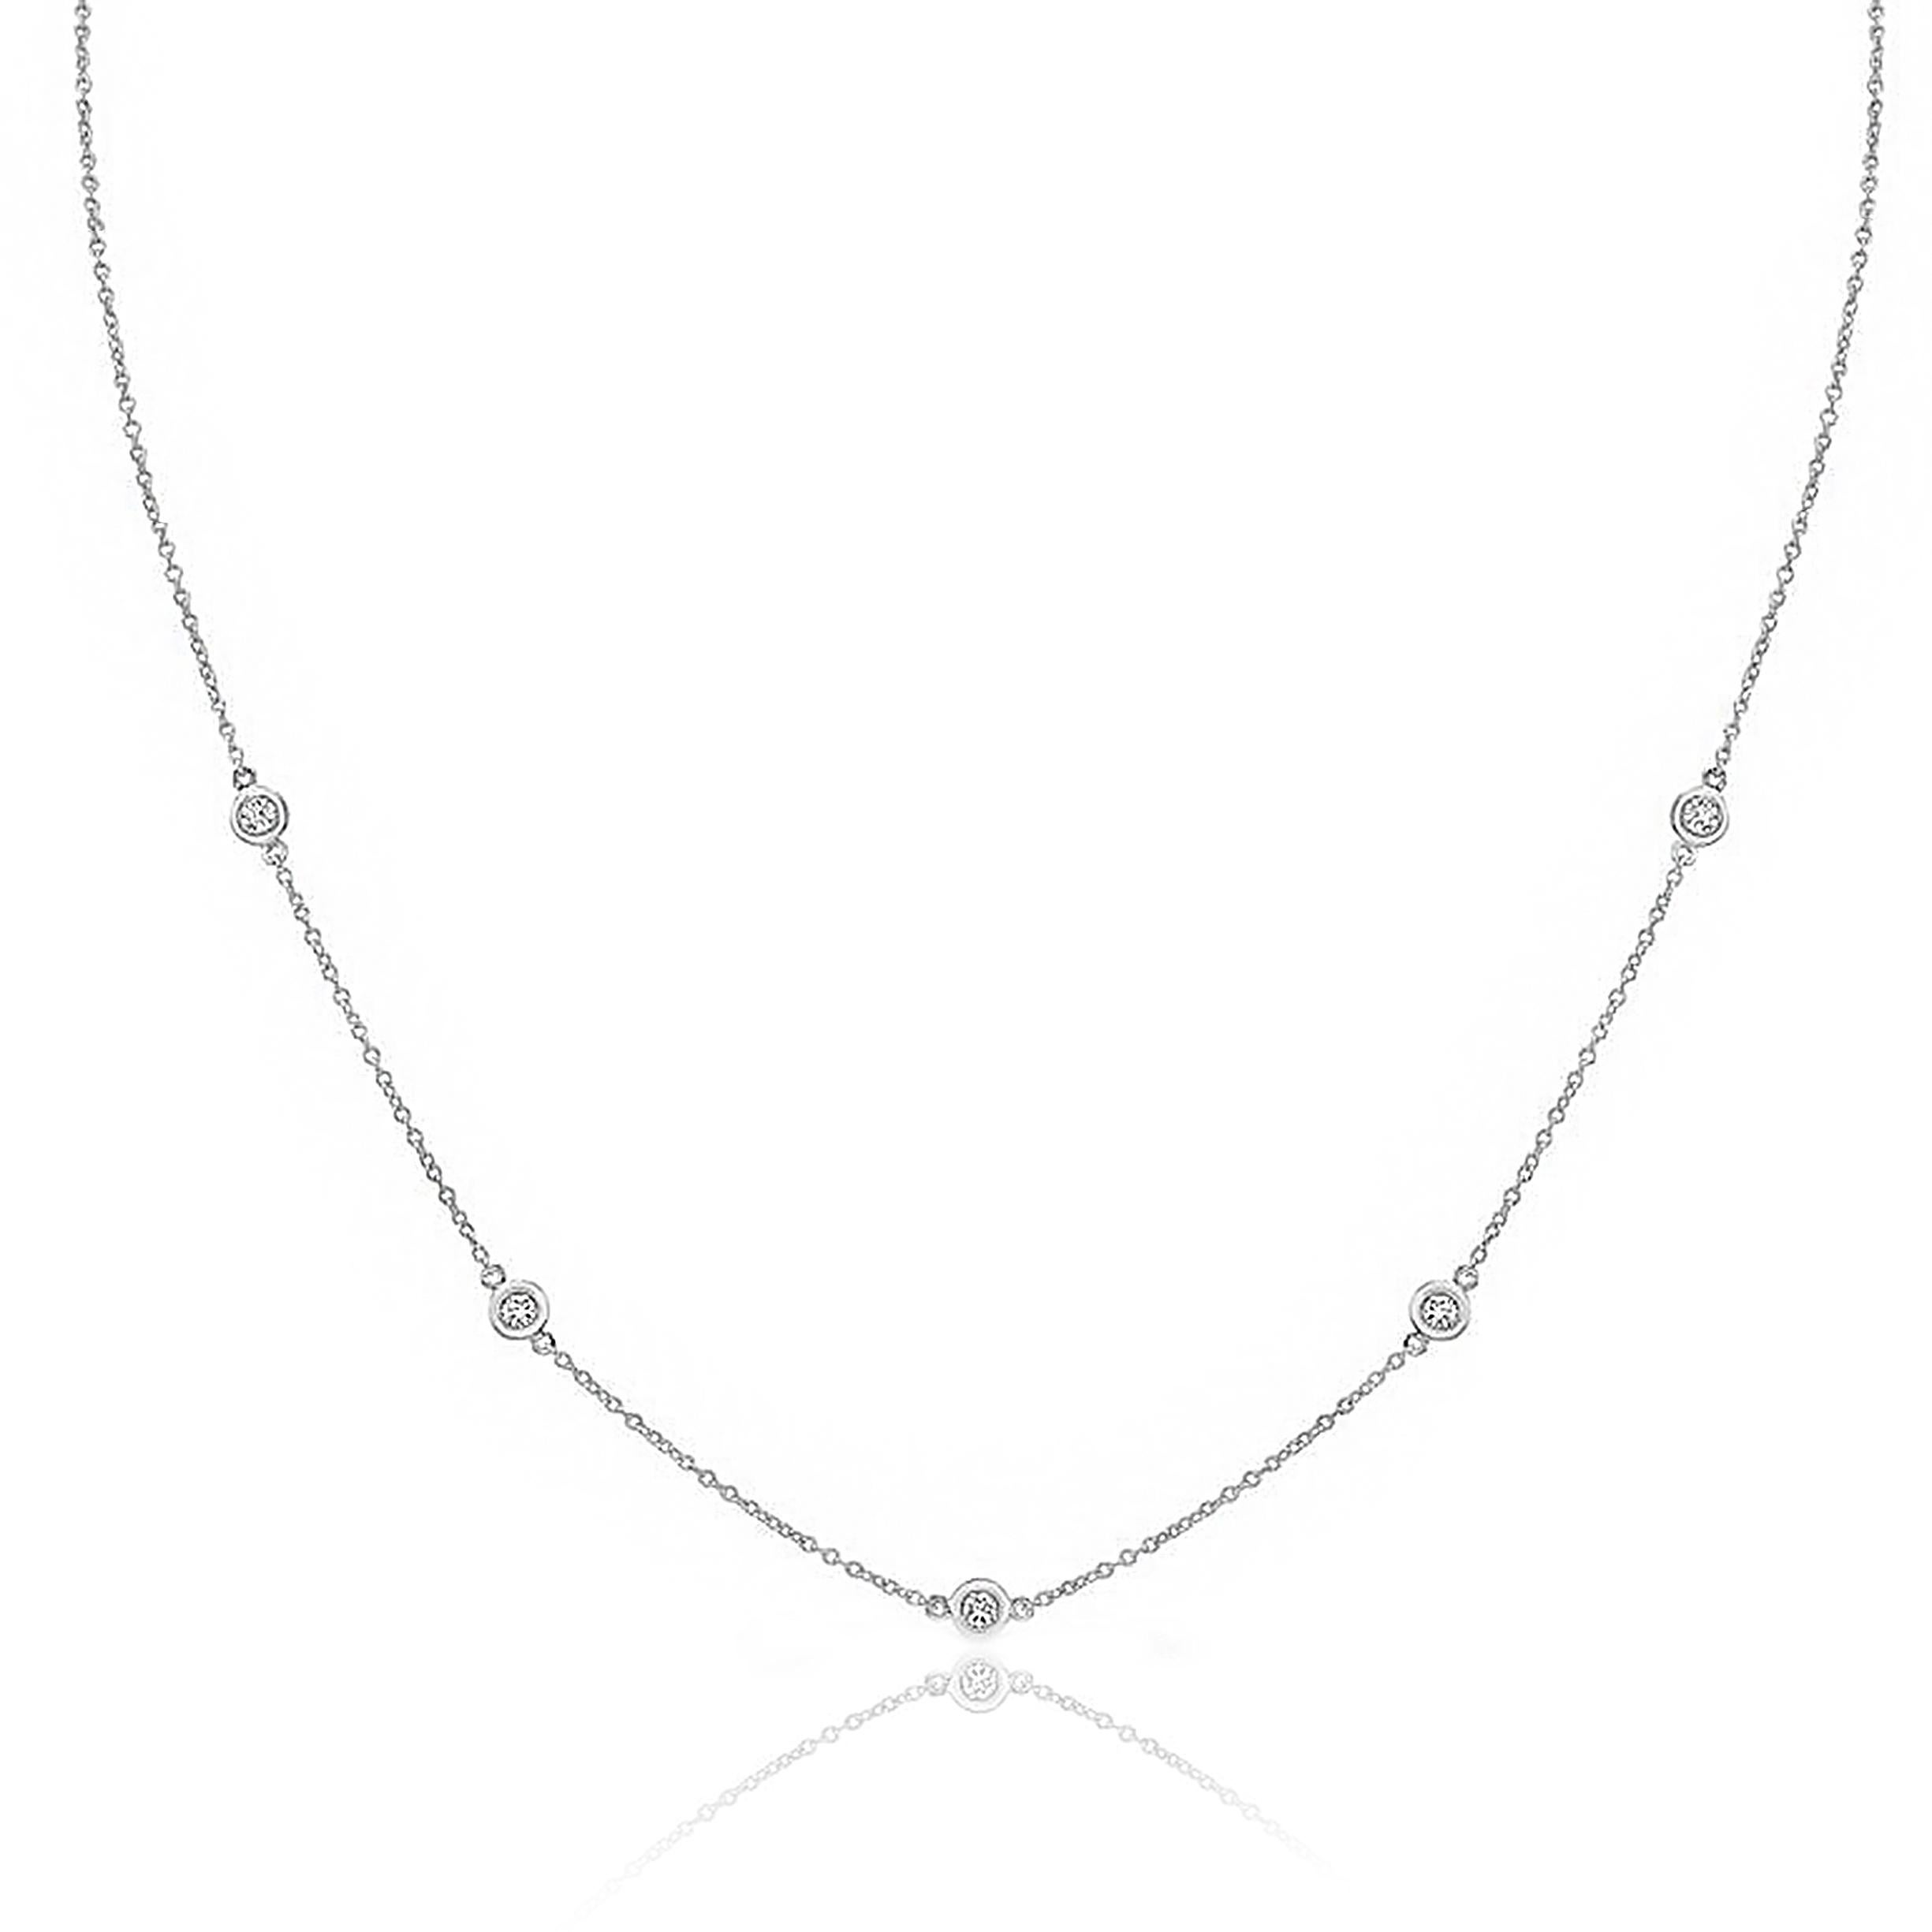 Brilliant Cut 0.25 Carat Diamond by the Yard Chain Necklace in 14K White Gold For Sale